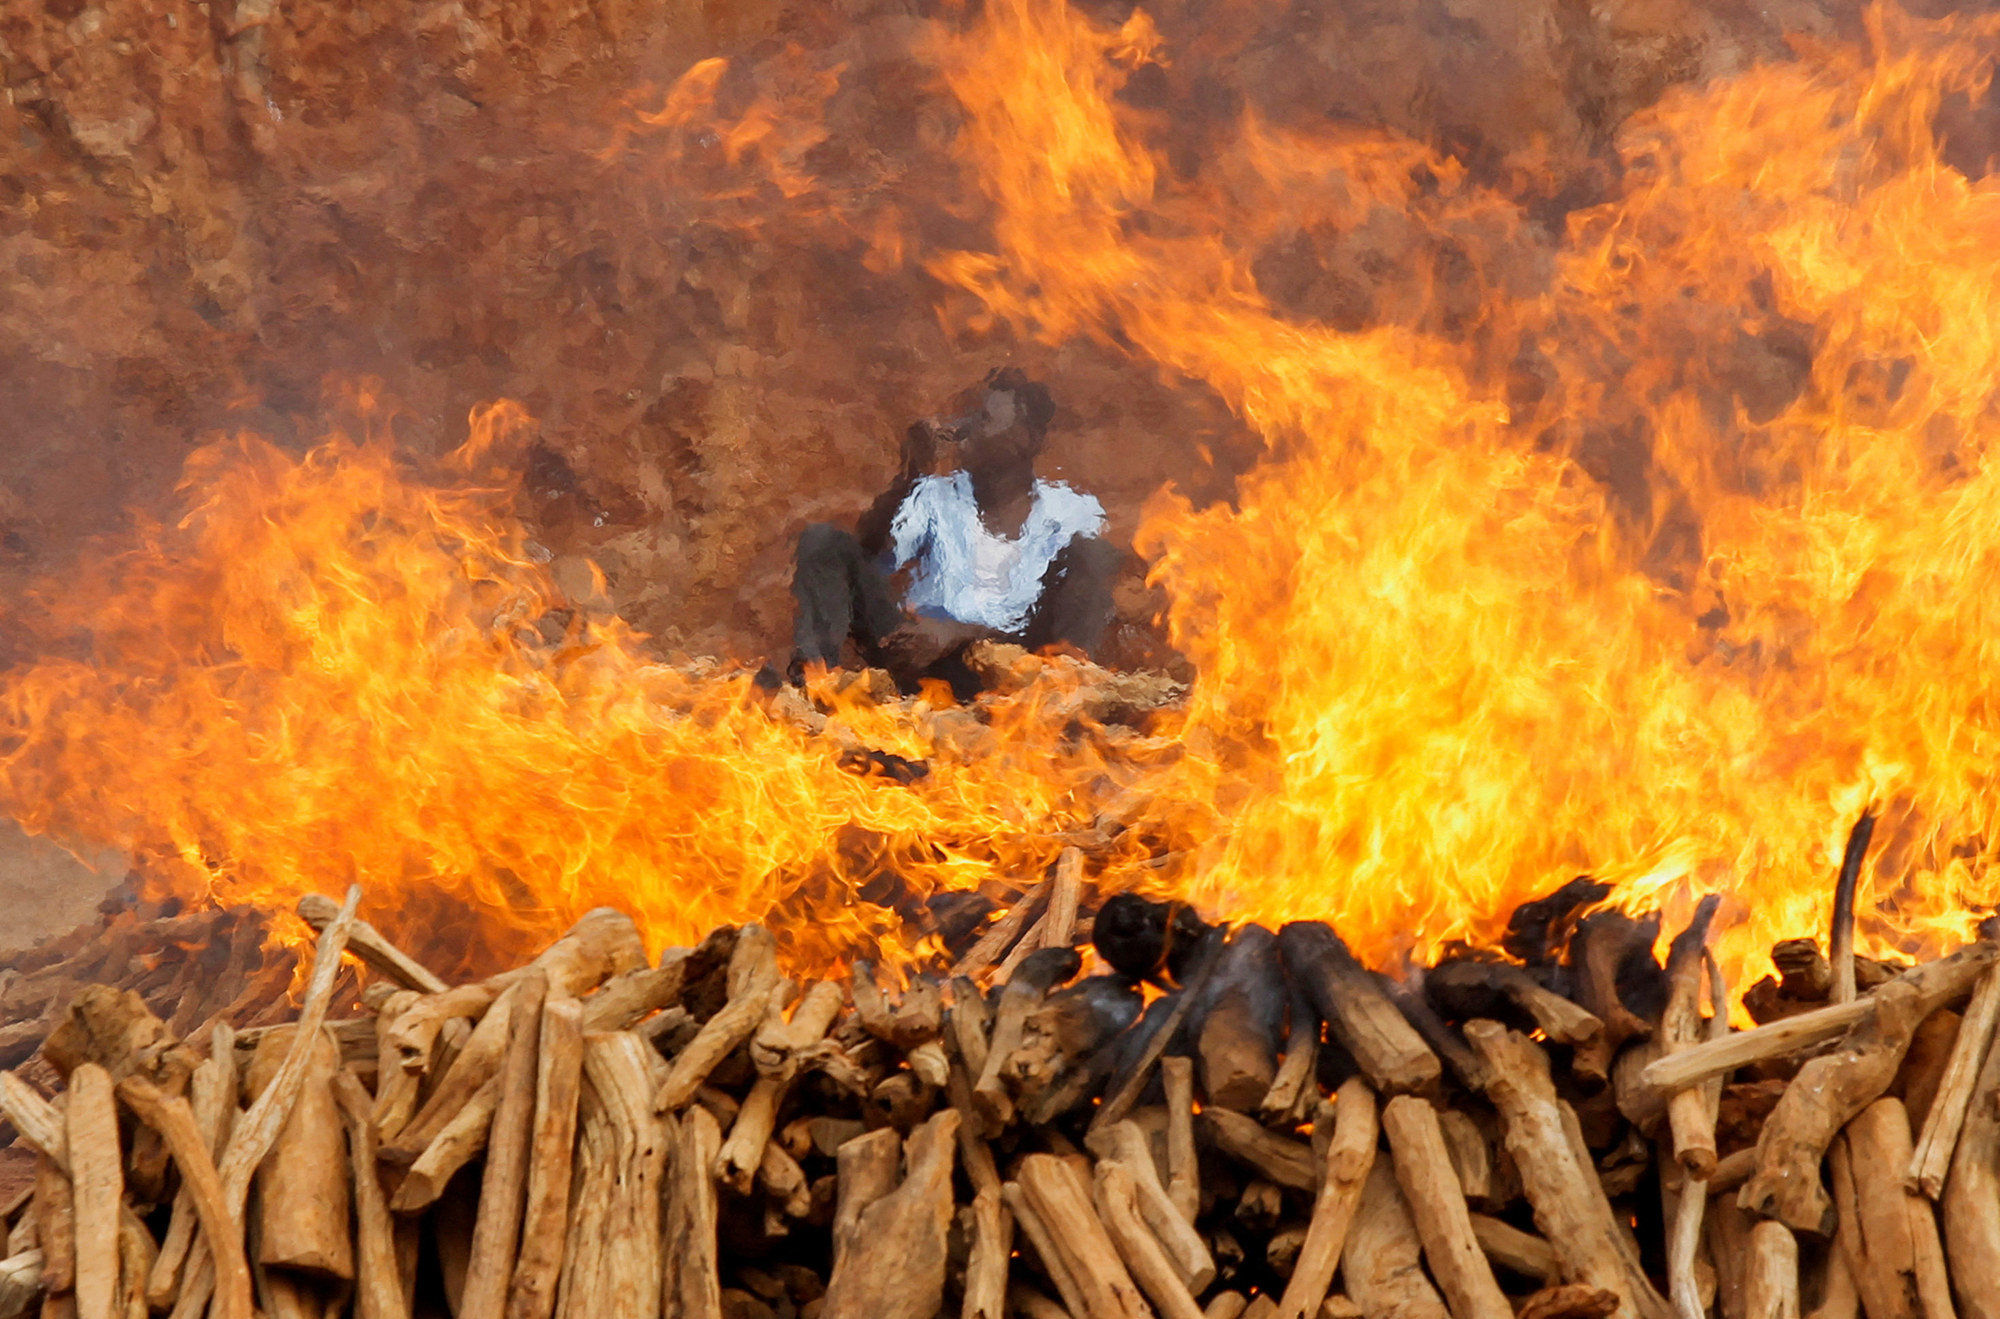 a man sits in the middle of a gigantic wood fire, his image is blurry due to the smoke